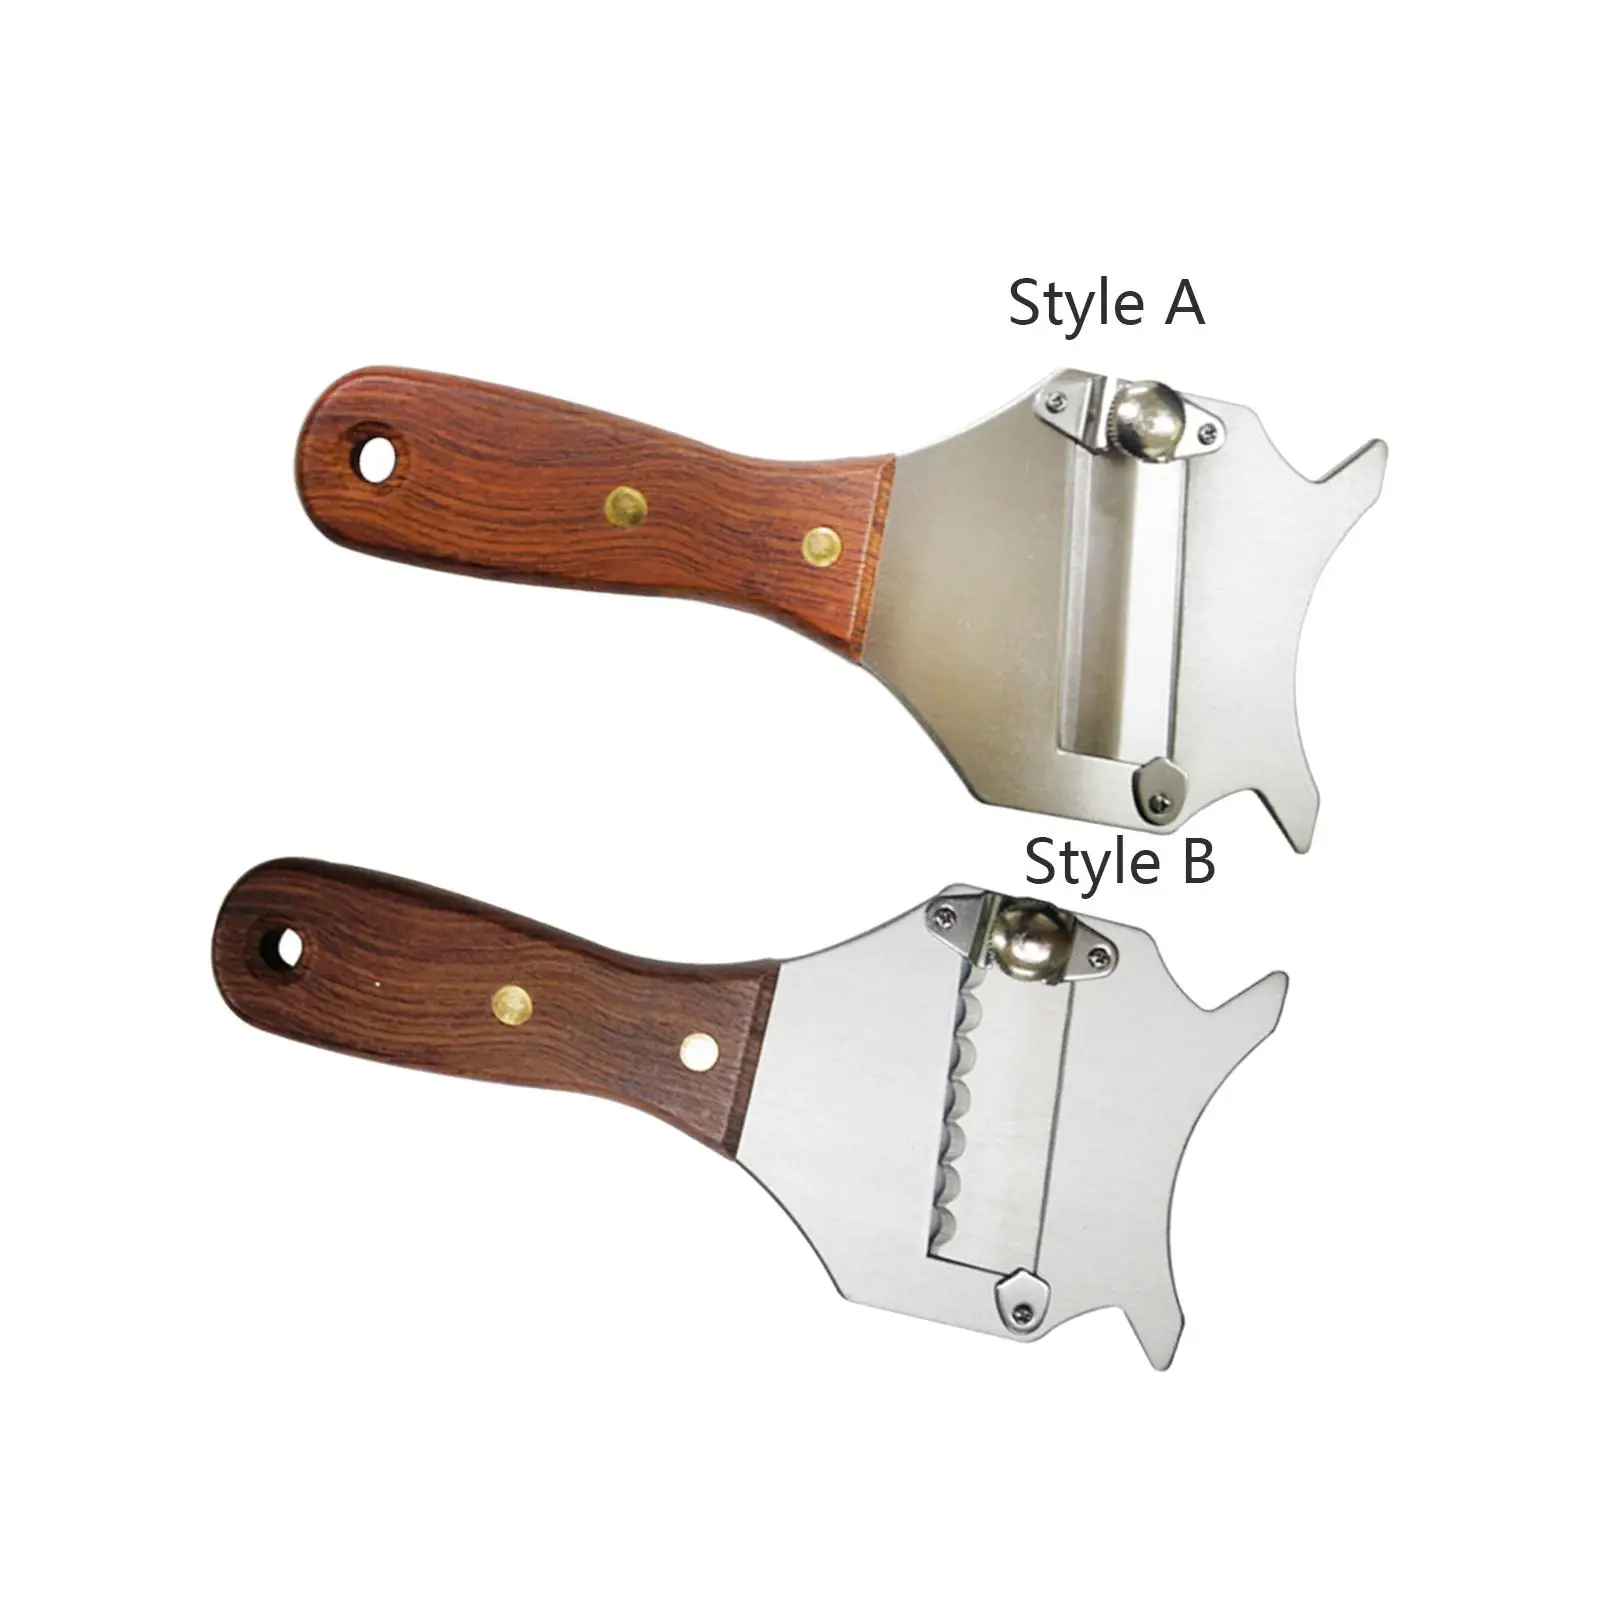 Cheese Chocolate Slicer Utensils with Wood Handle Stainless Steel Truffle Slicer